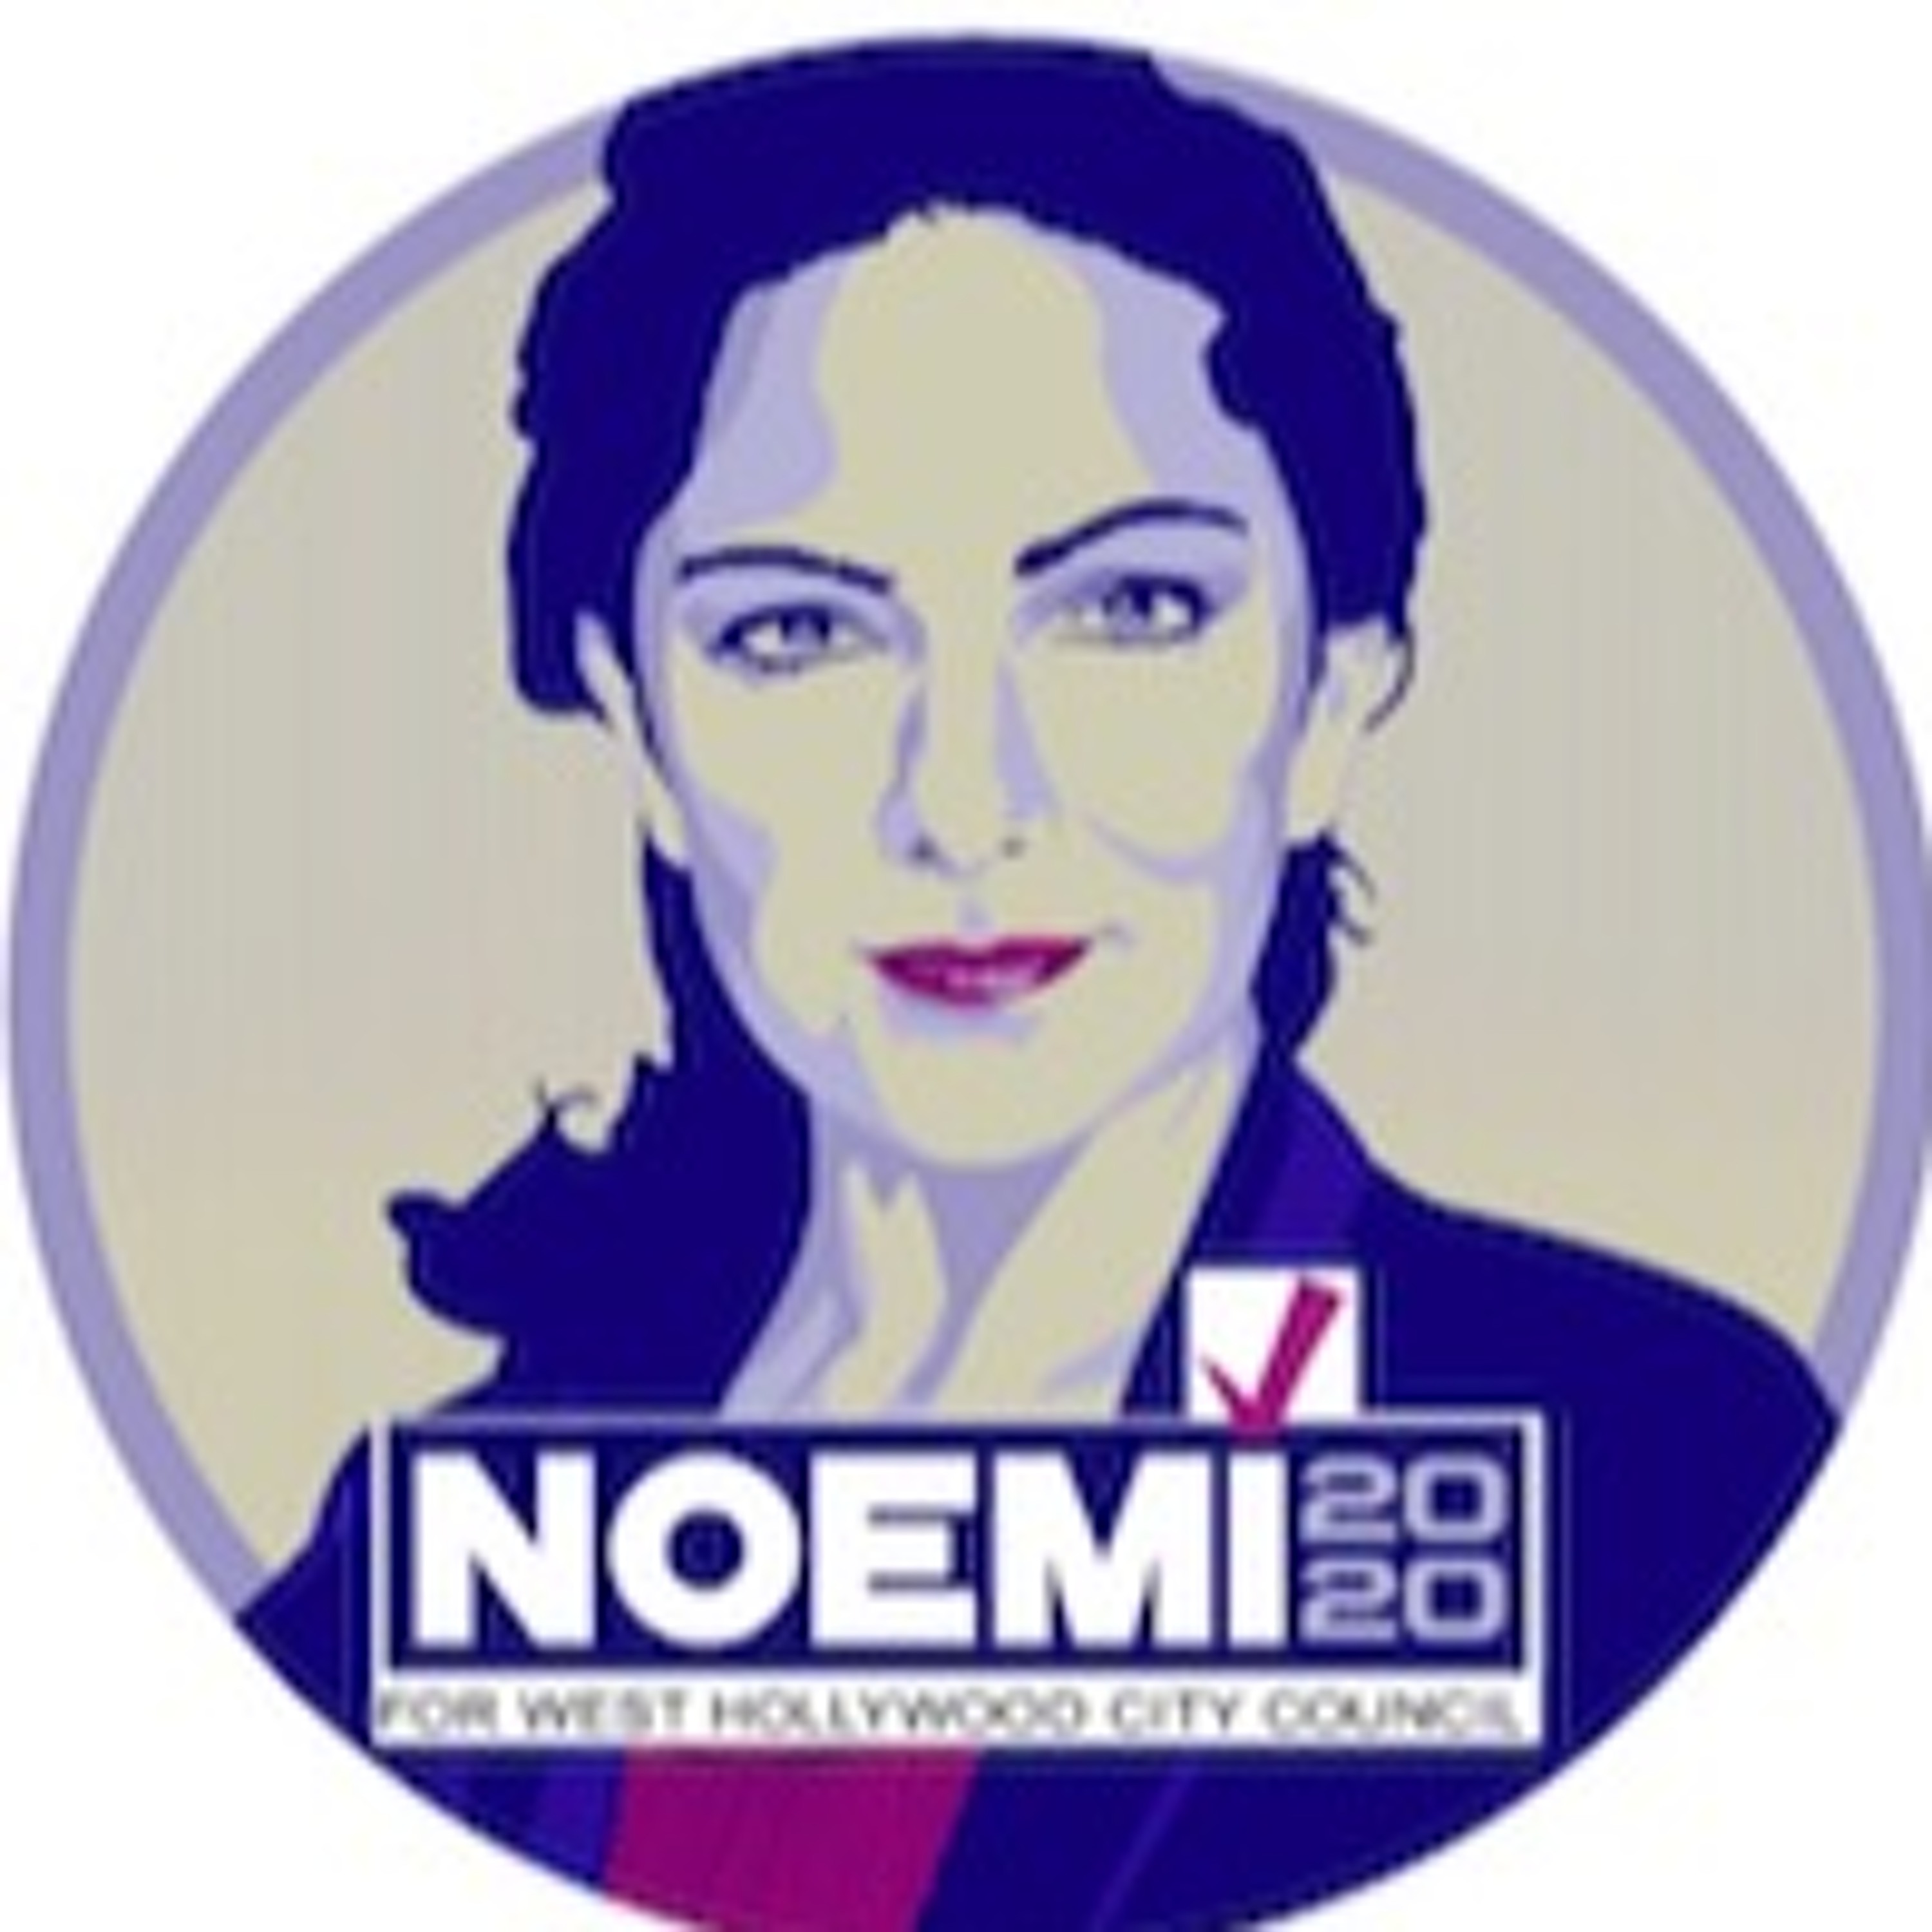 Episode 310 - Noemi Torres For West Hollywood City Council